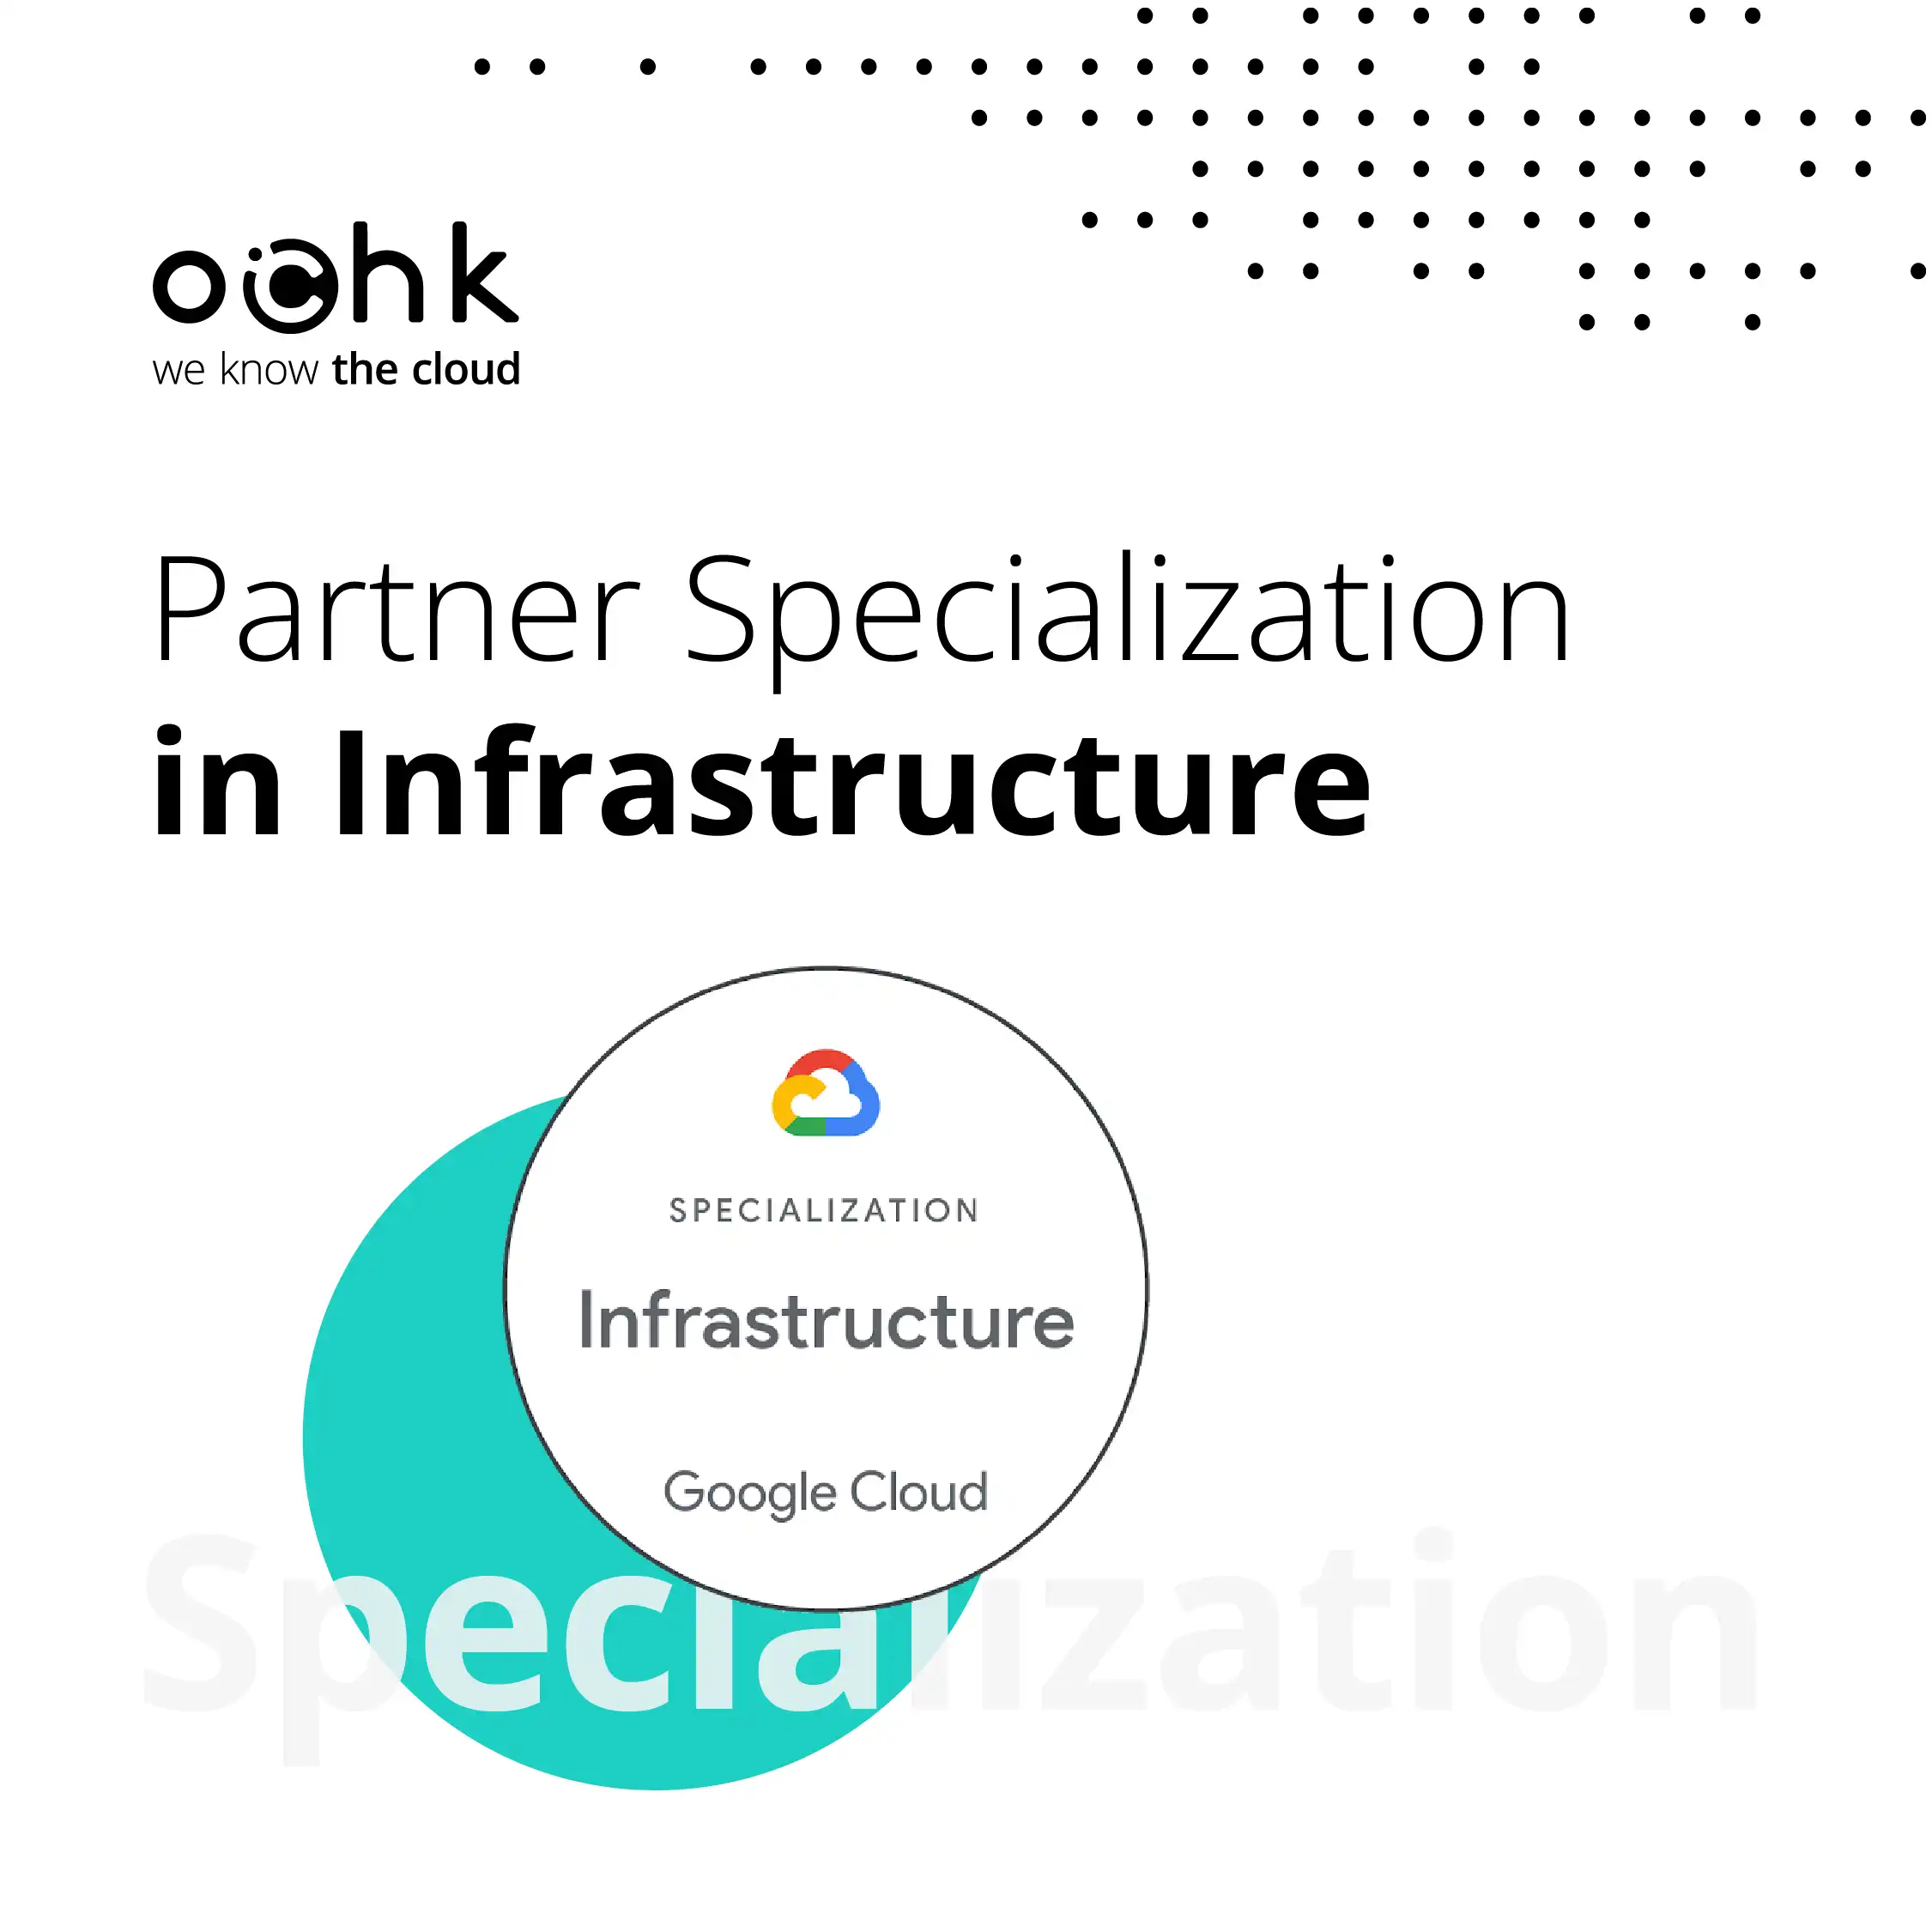 OChK with Google Cloud specialization: Infrastructure – Services